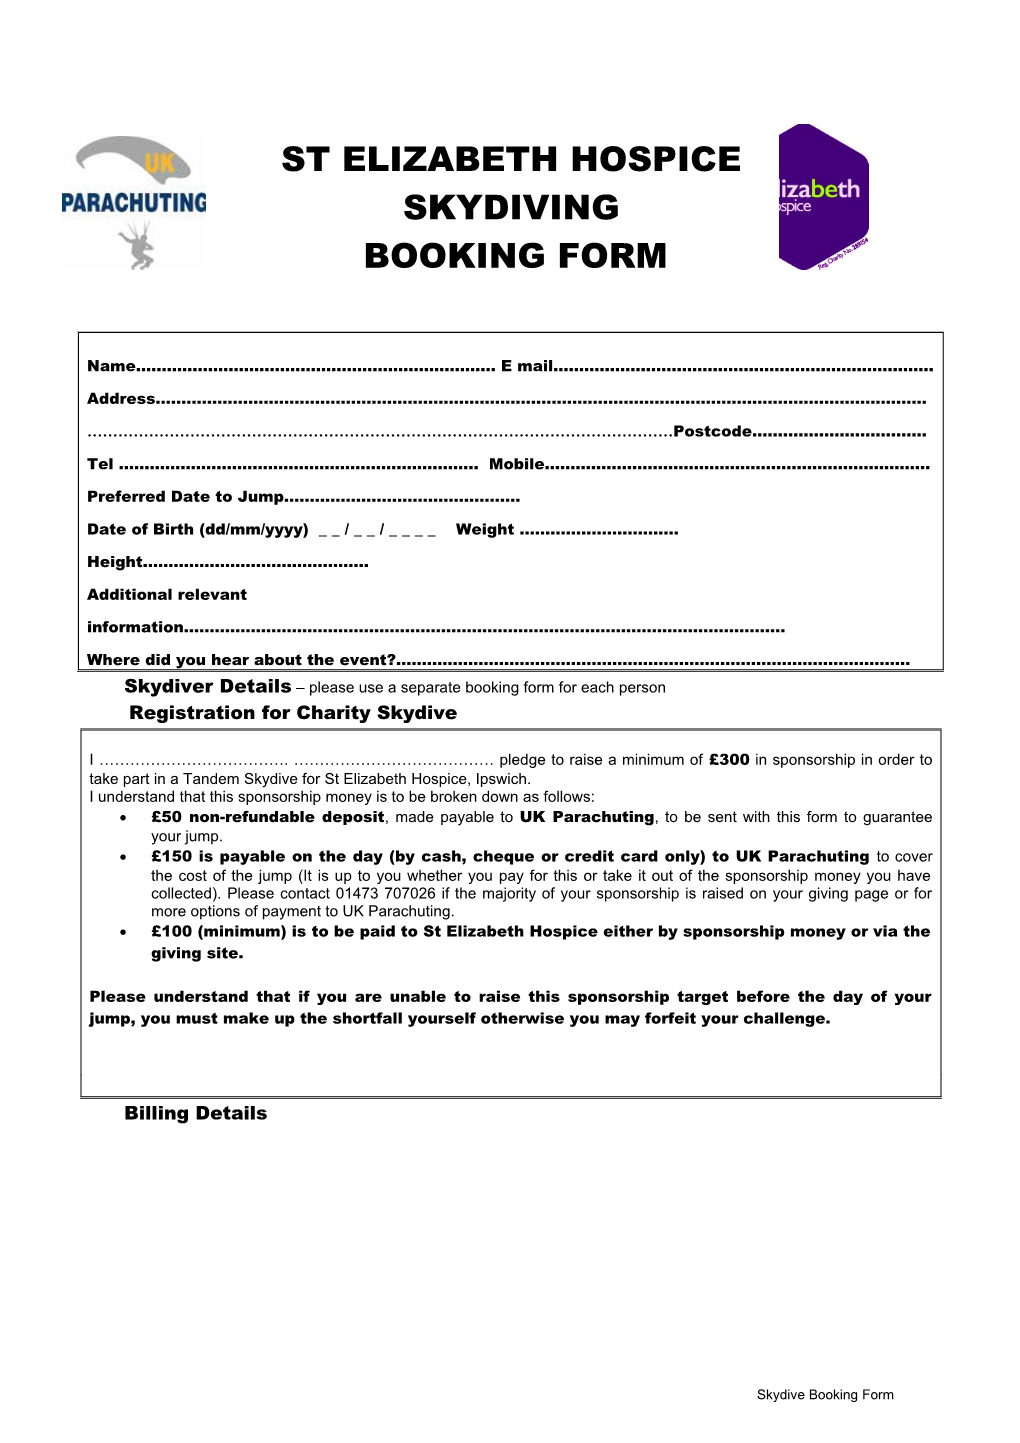 Skydiver Details Please Use a Separate Booking Form for Each Person